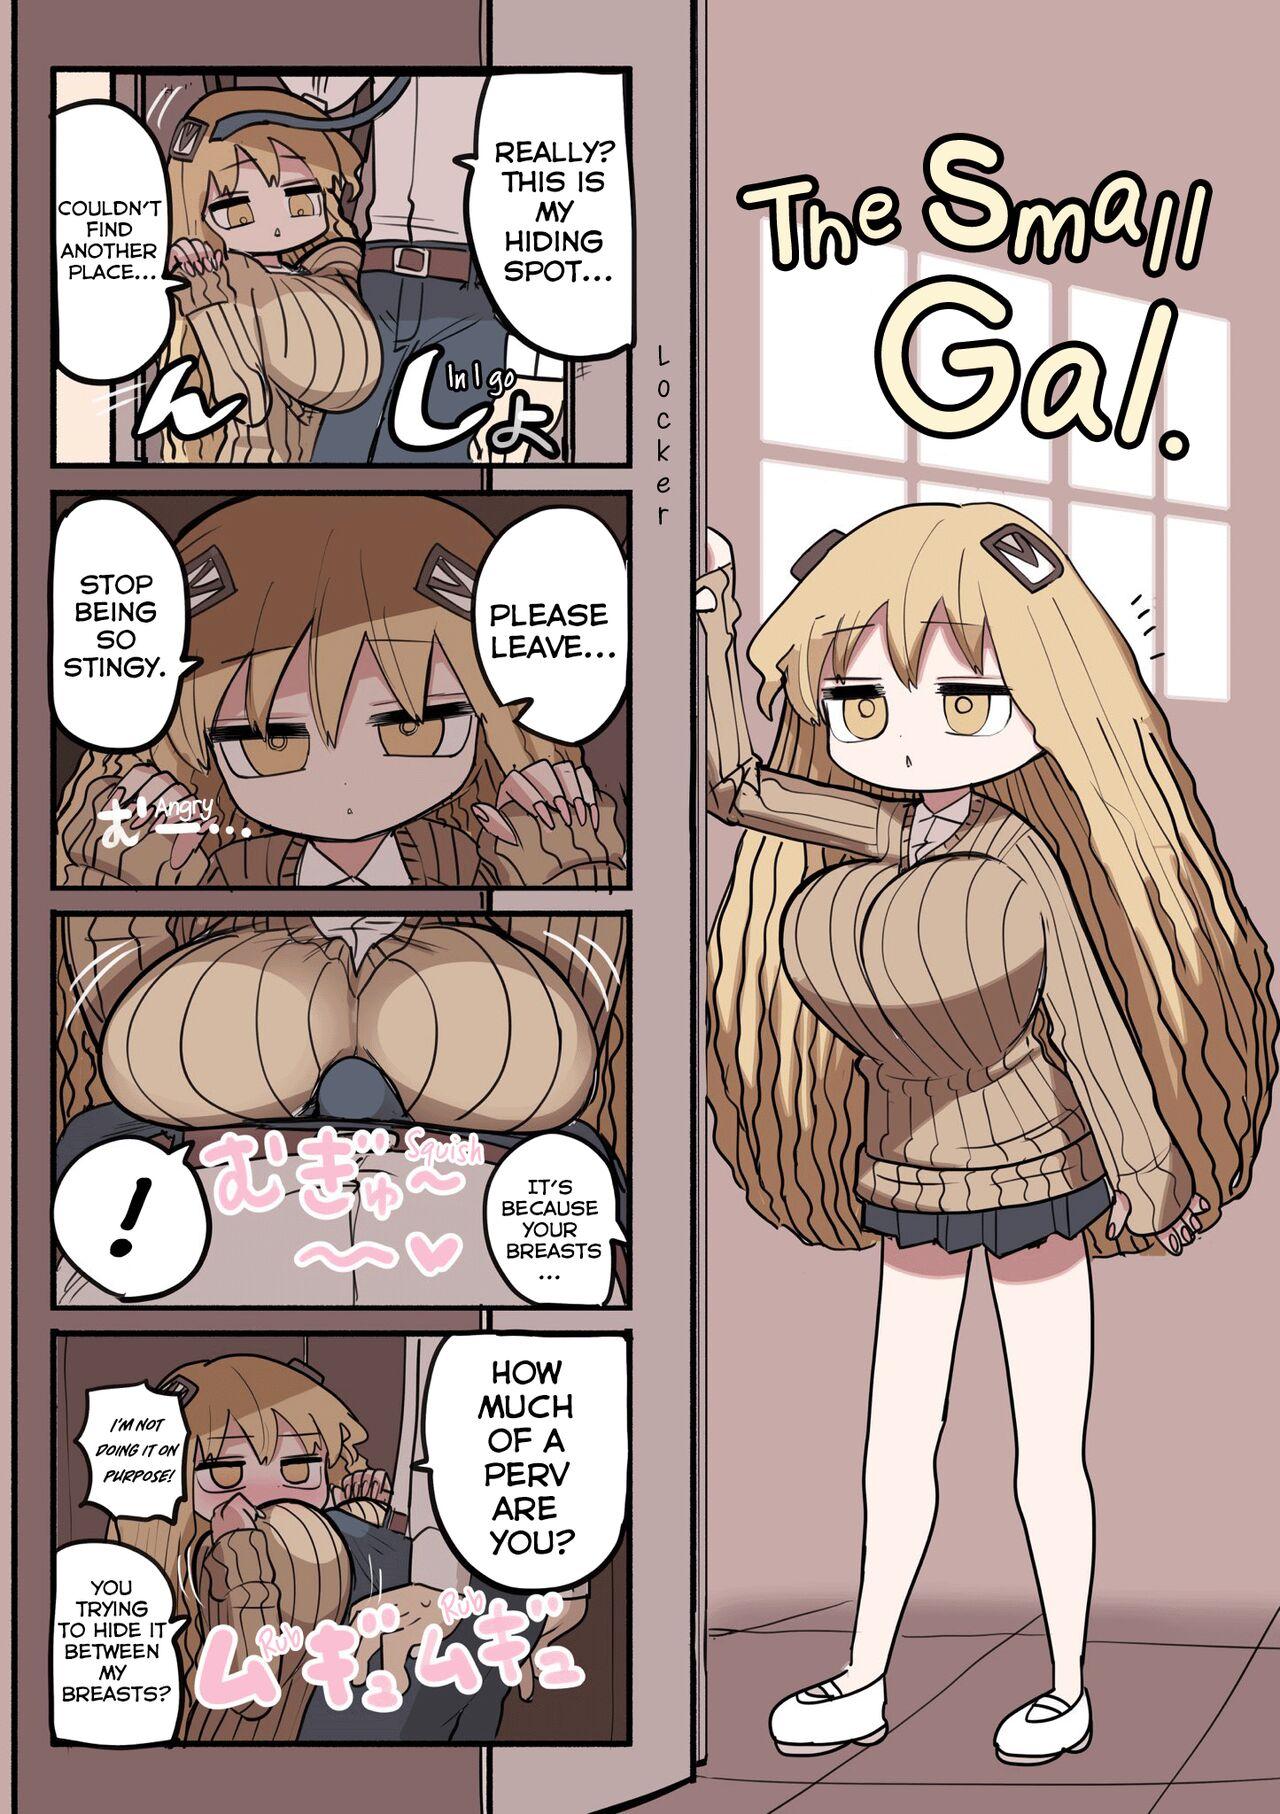 Double Penetration Chisai Gal Self - Page 11